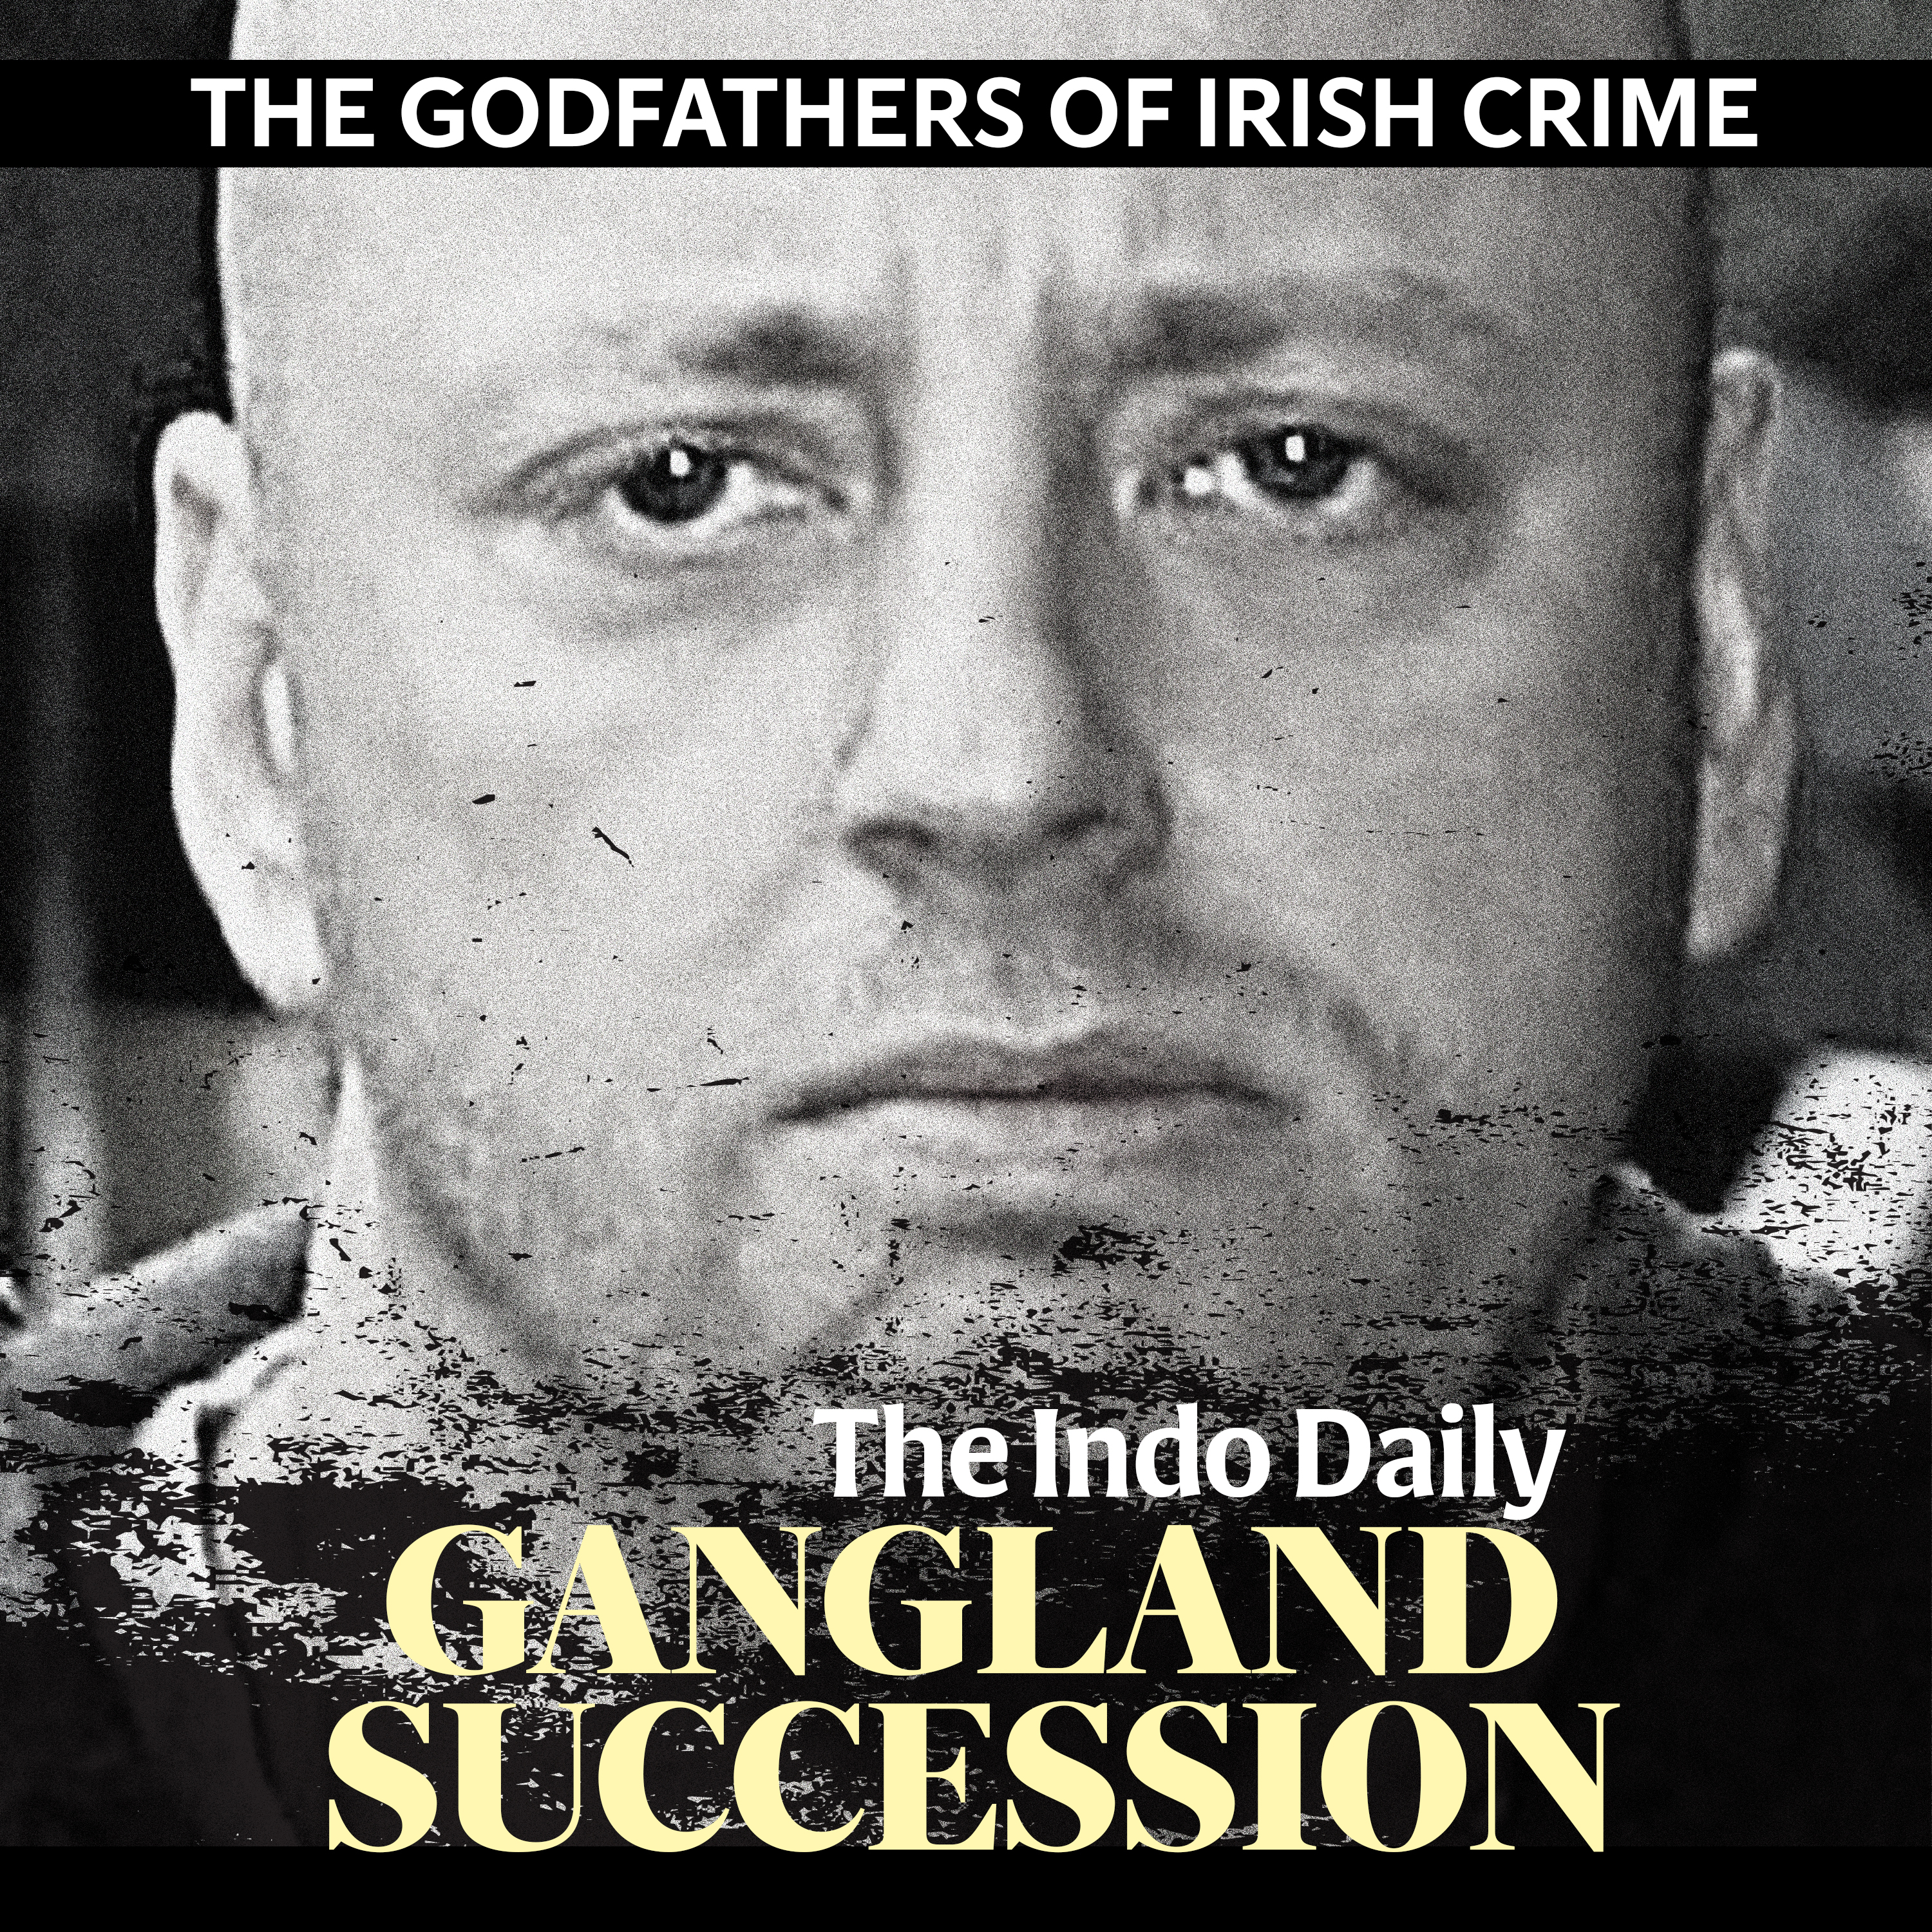 Gangland Succession|3: Eamon ‘The Don’ Dunne – Becoming the Kinahans’ problem